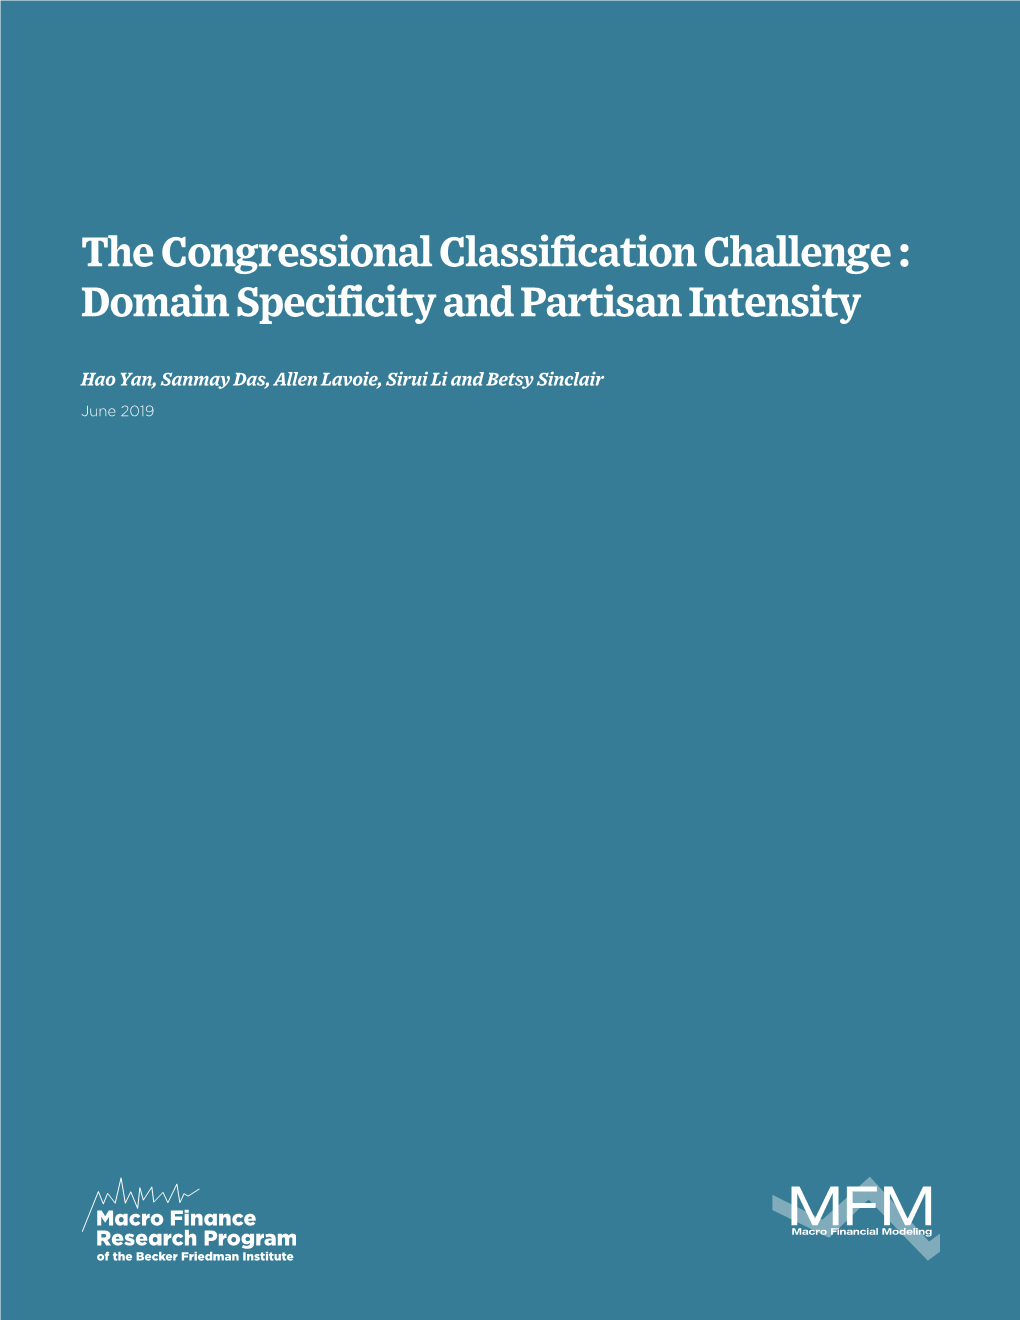 The Congressional Classification Challenge: Domain Specificity and Partisan Intensity